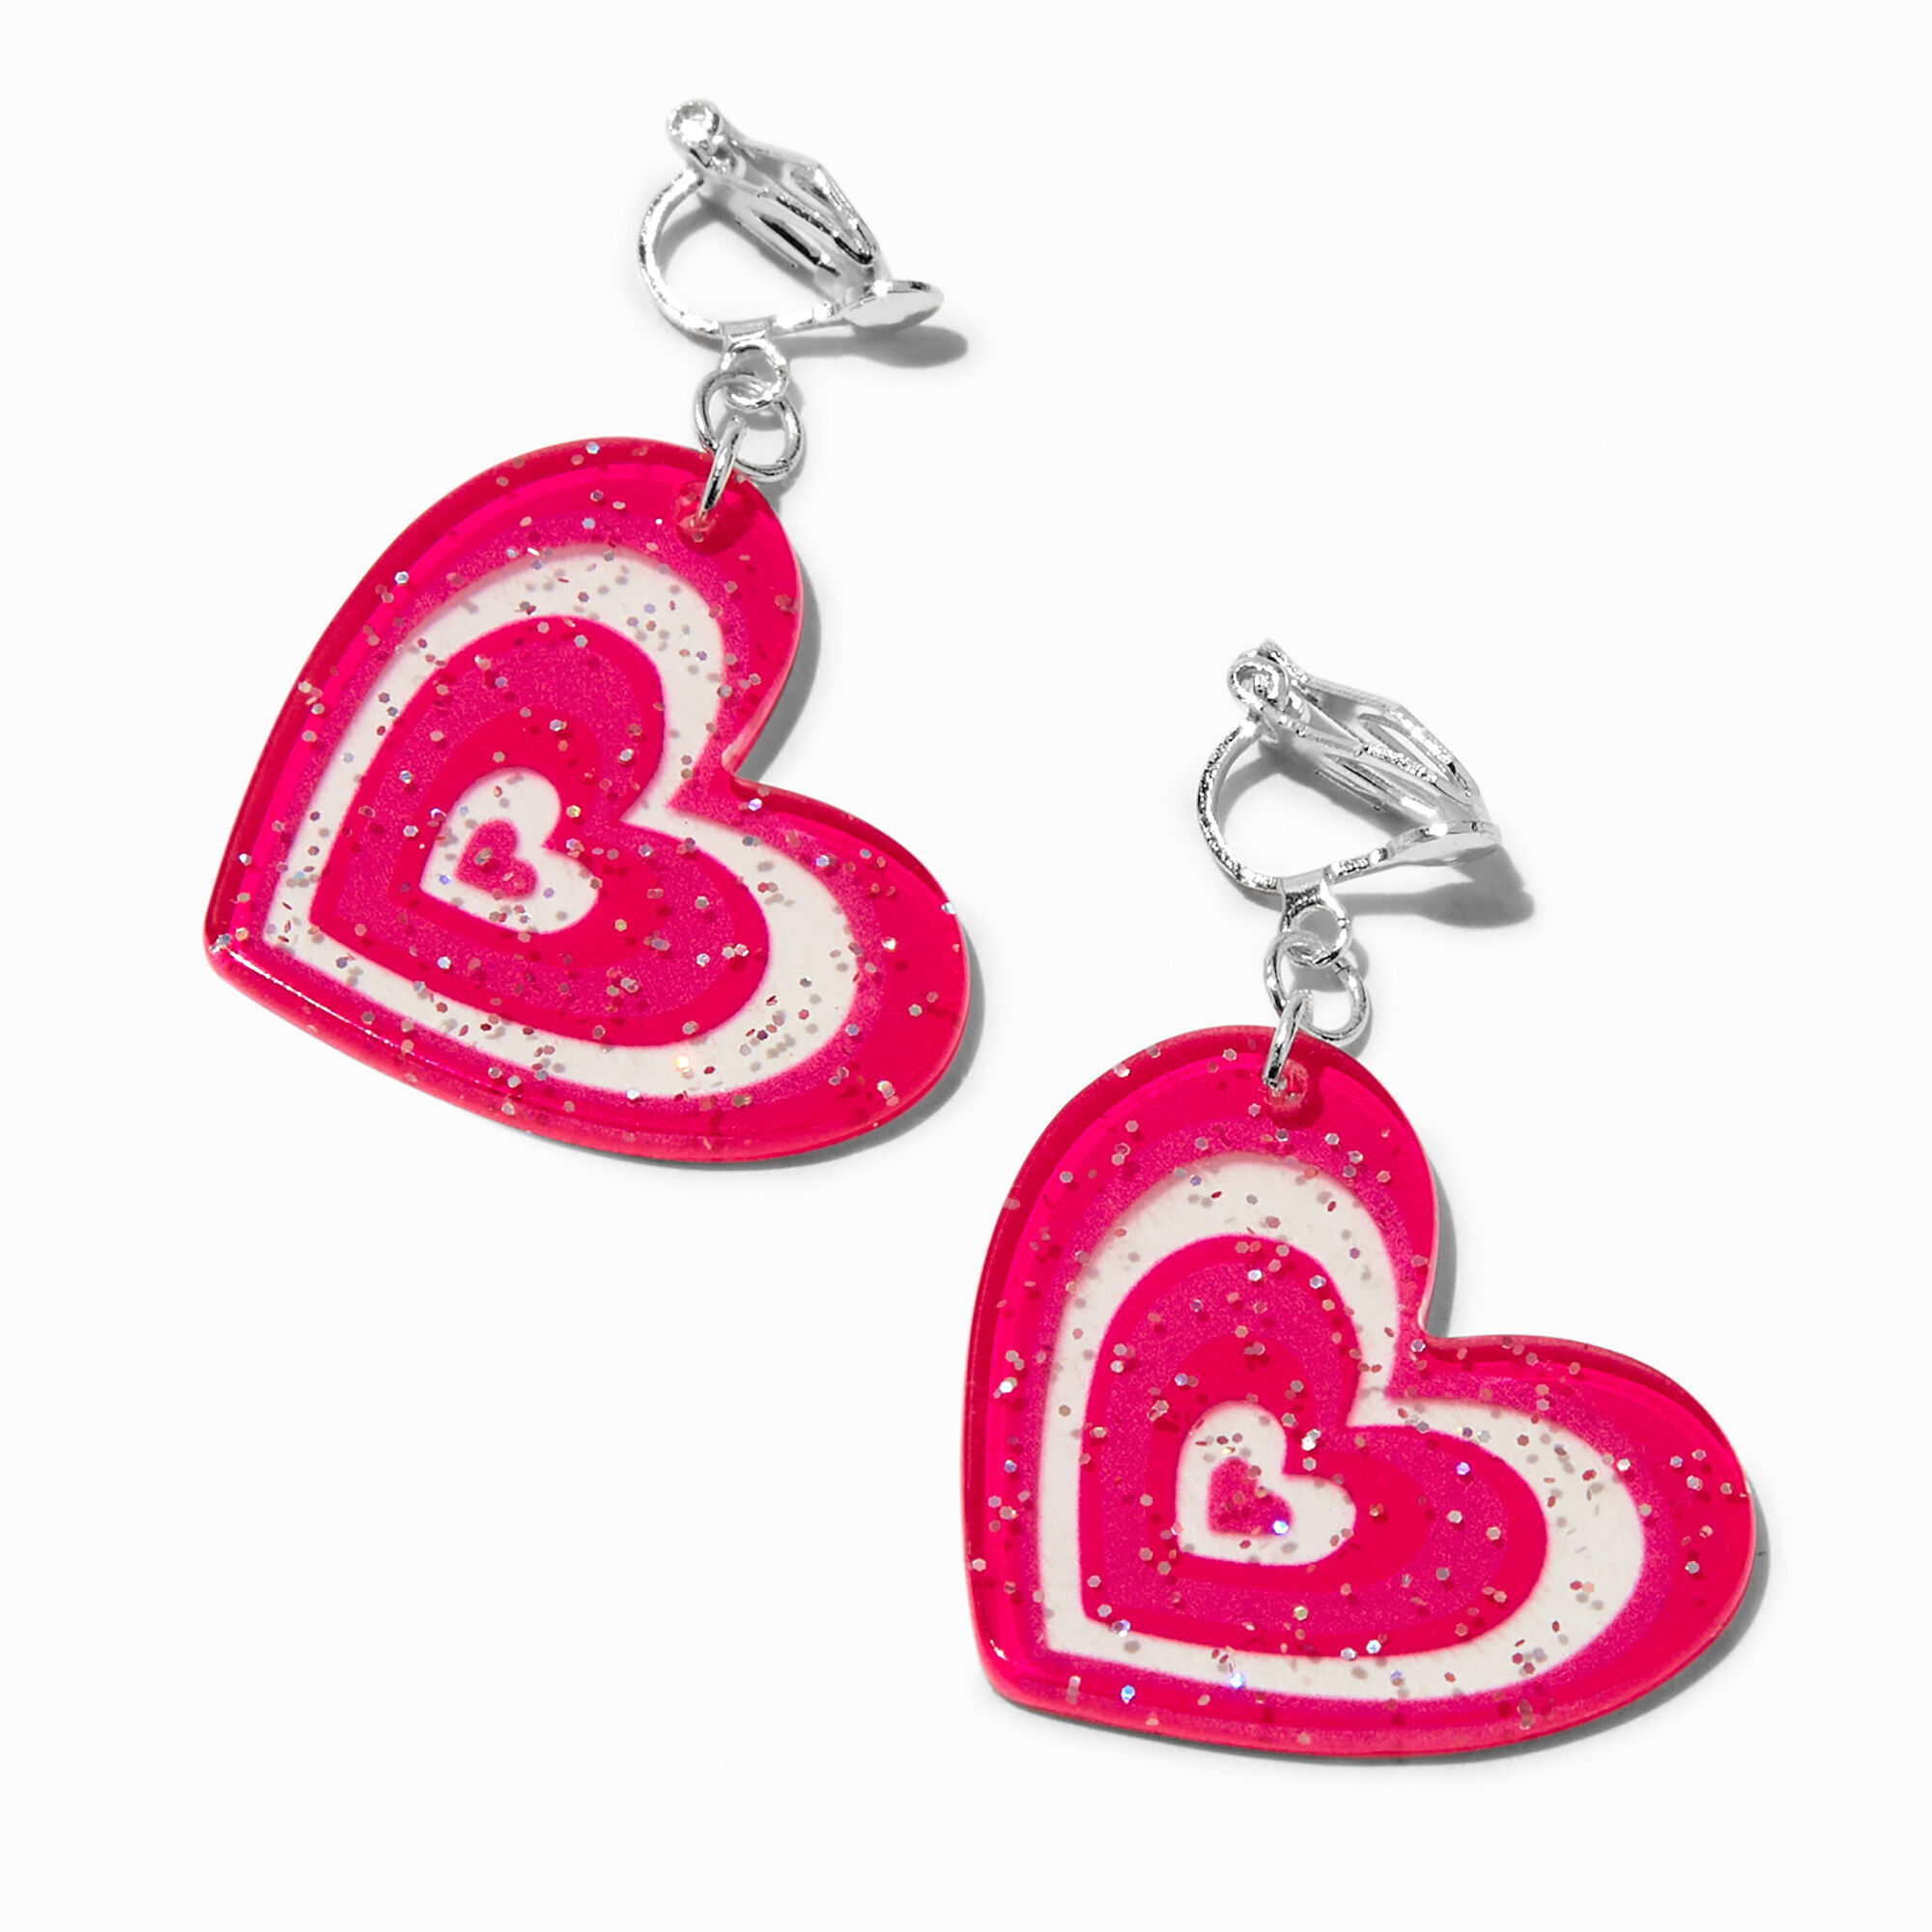 View Claires Pulsating Heart 15 ClipOn Drop Earrings Pink information